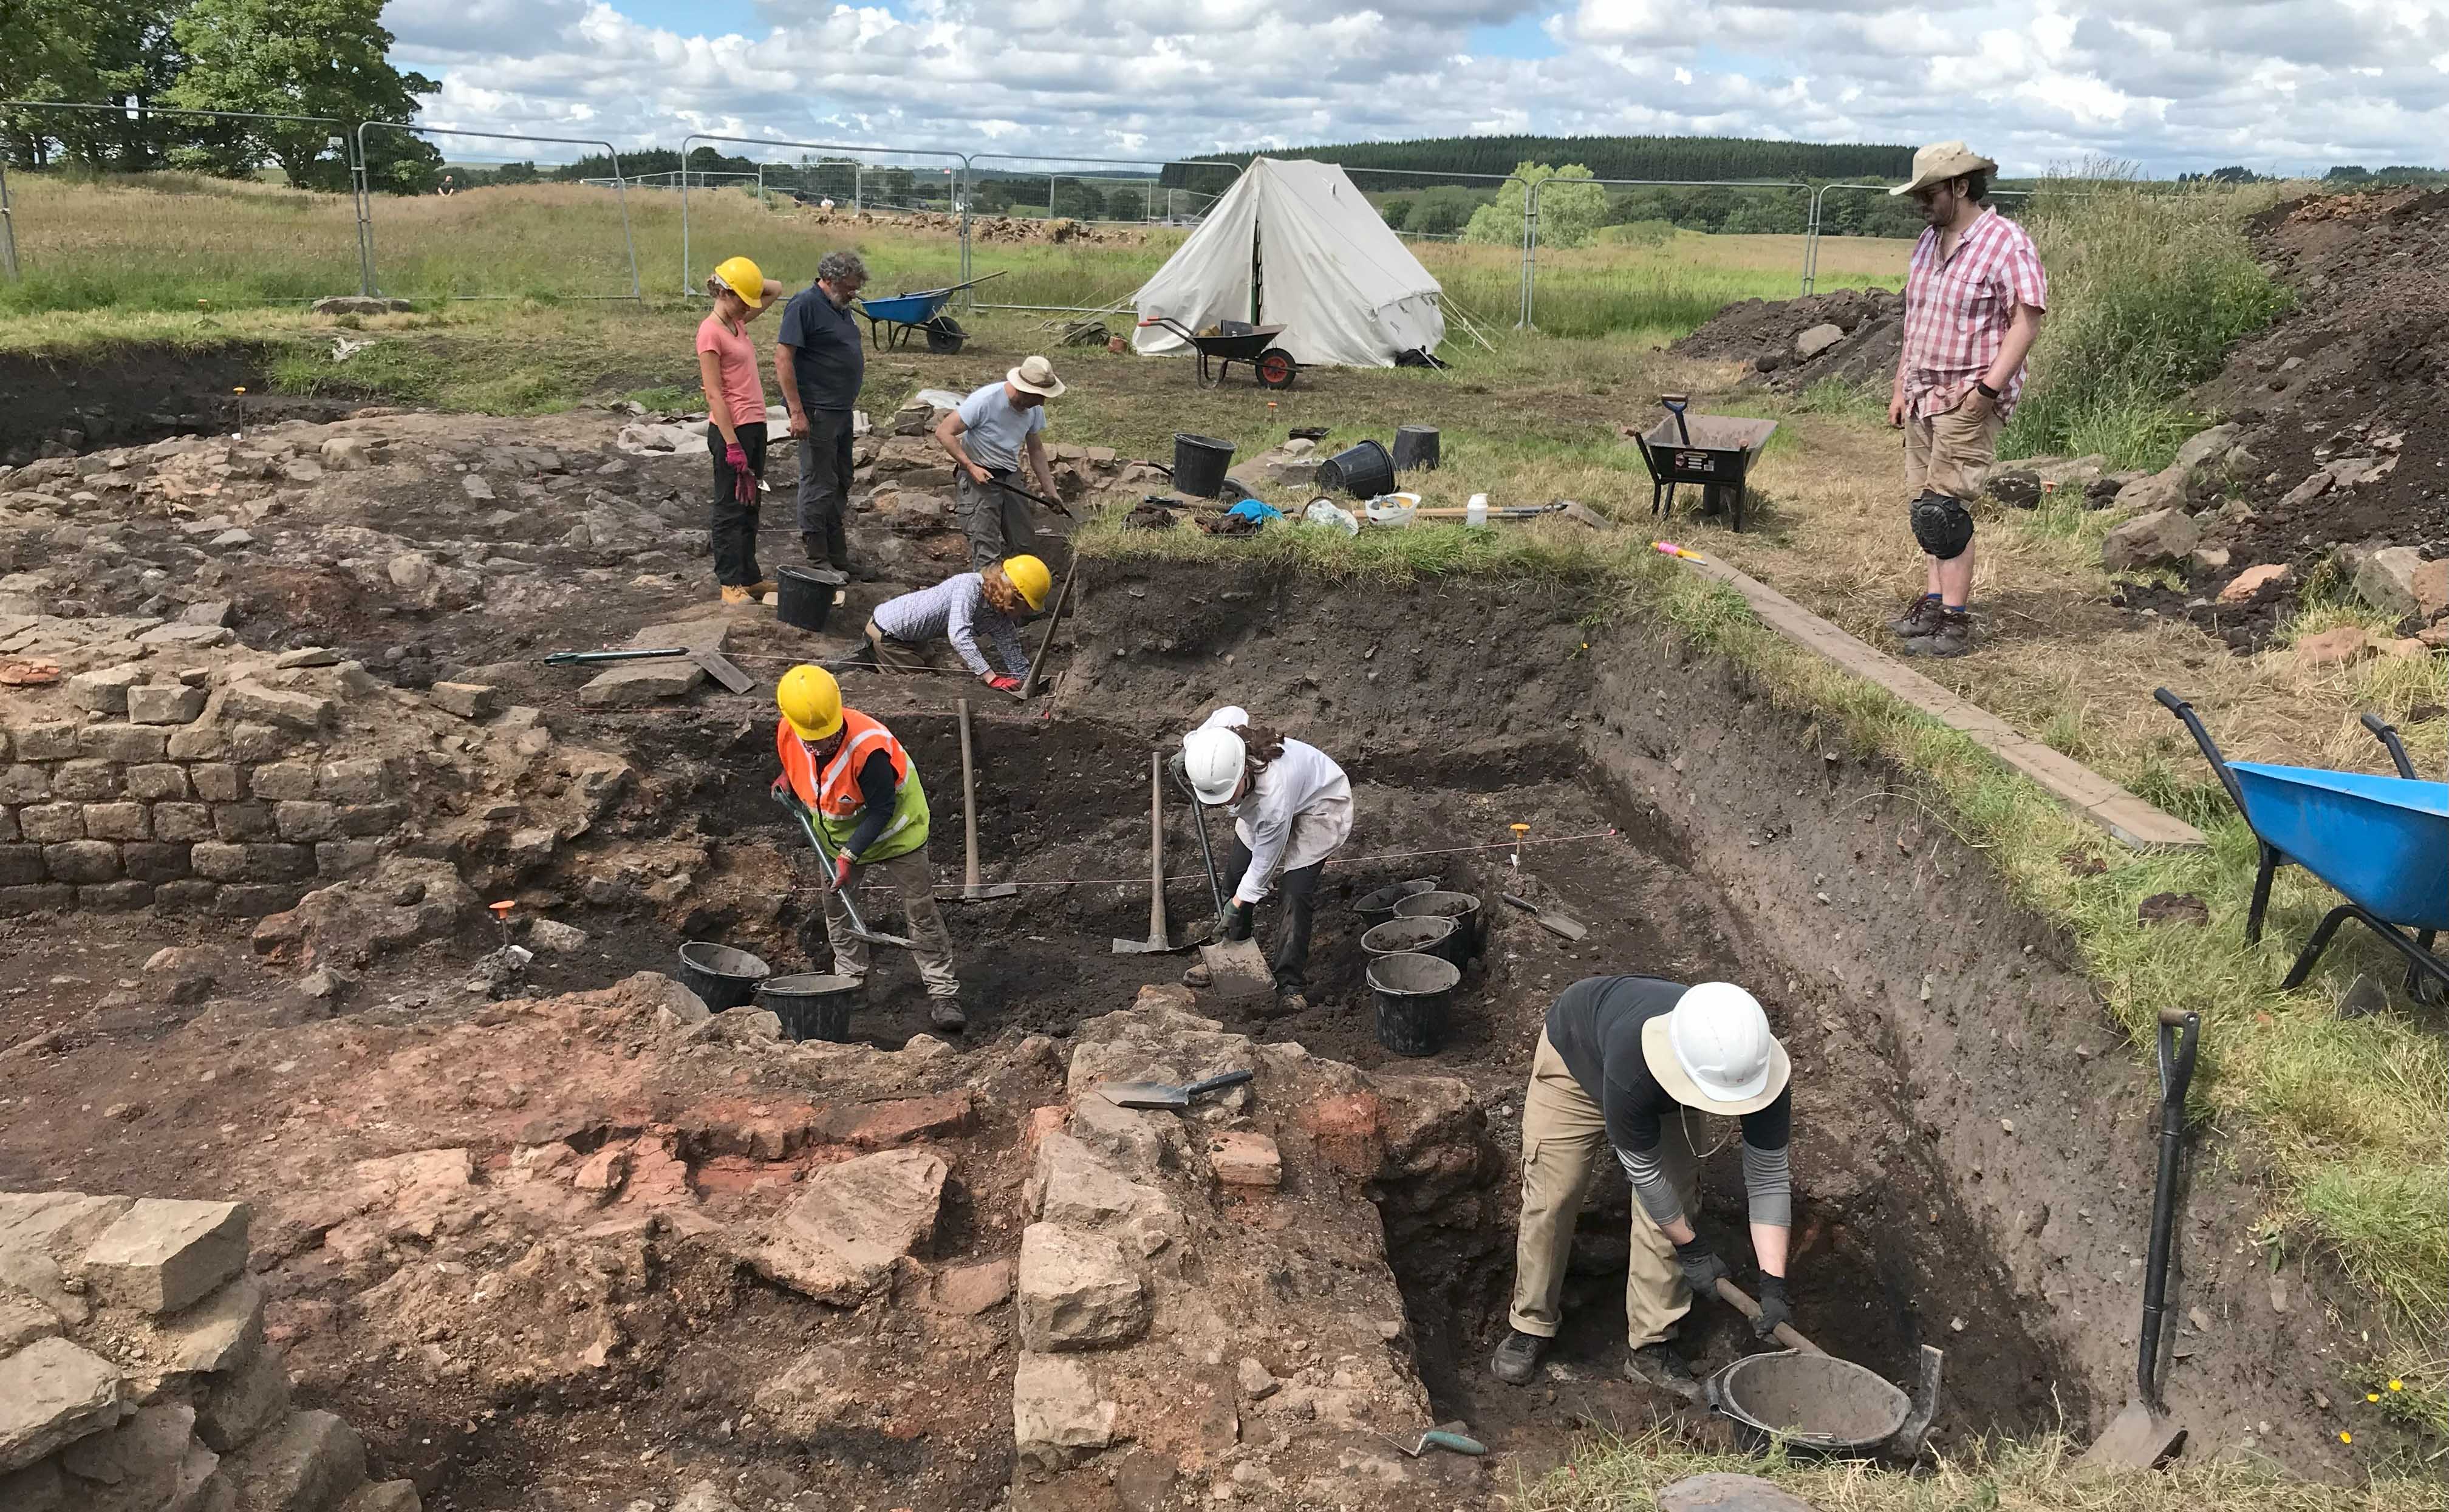 Archaeologists excavating the site at Birdoswald